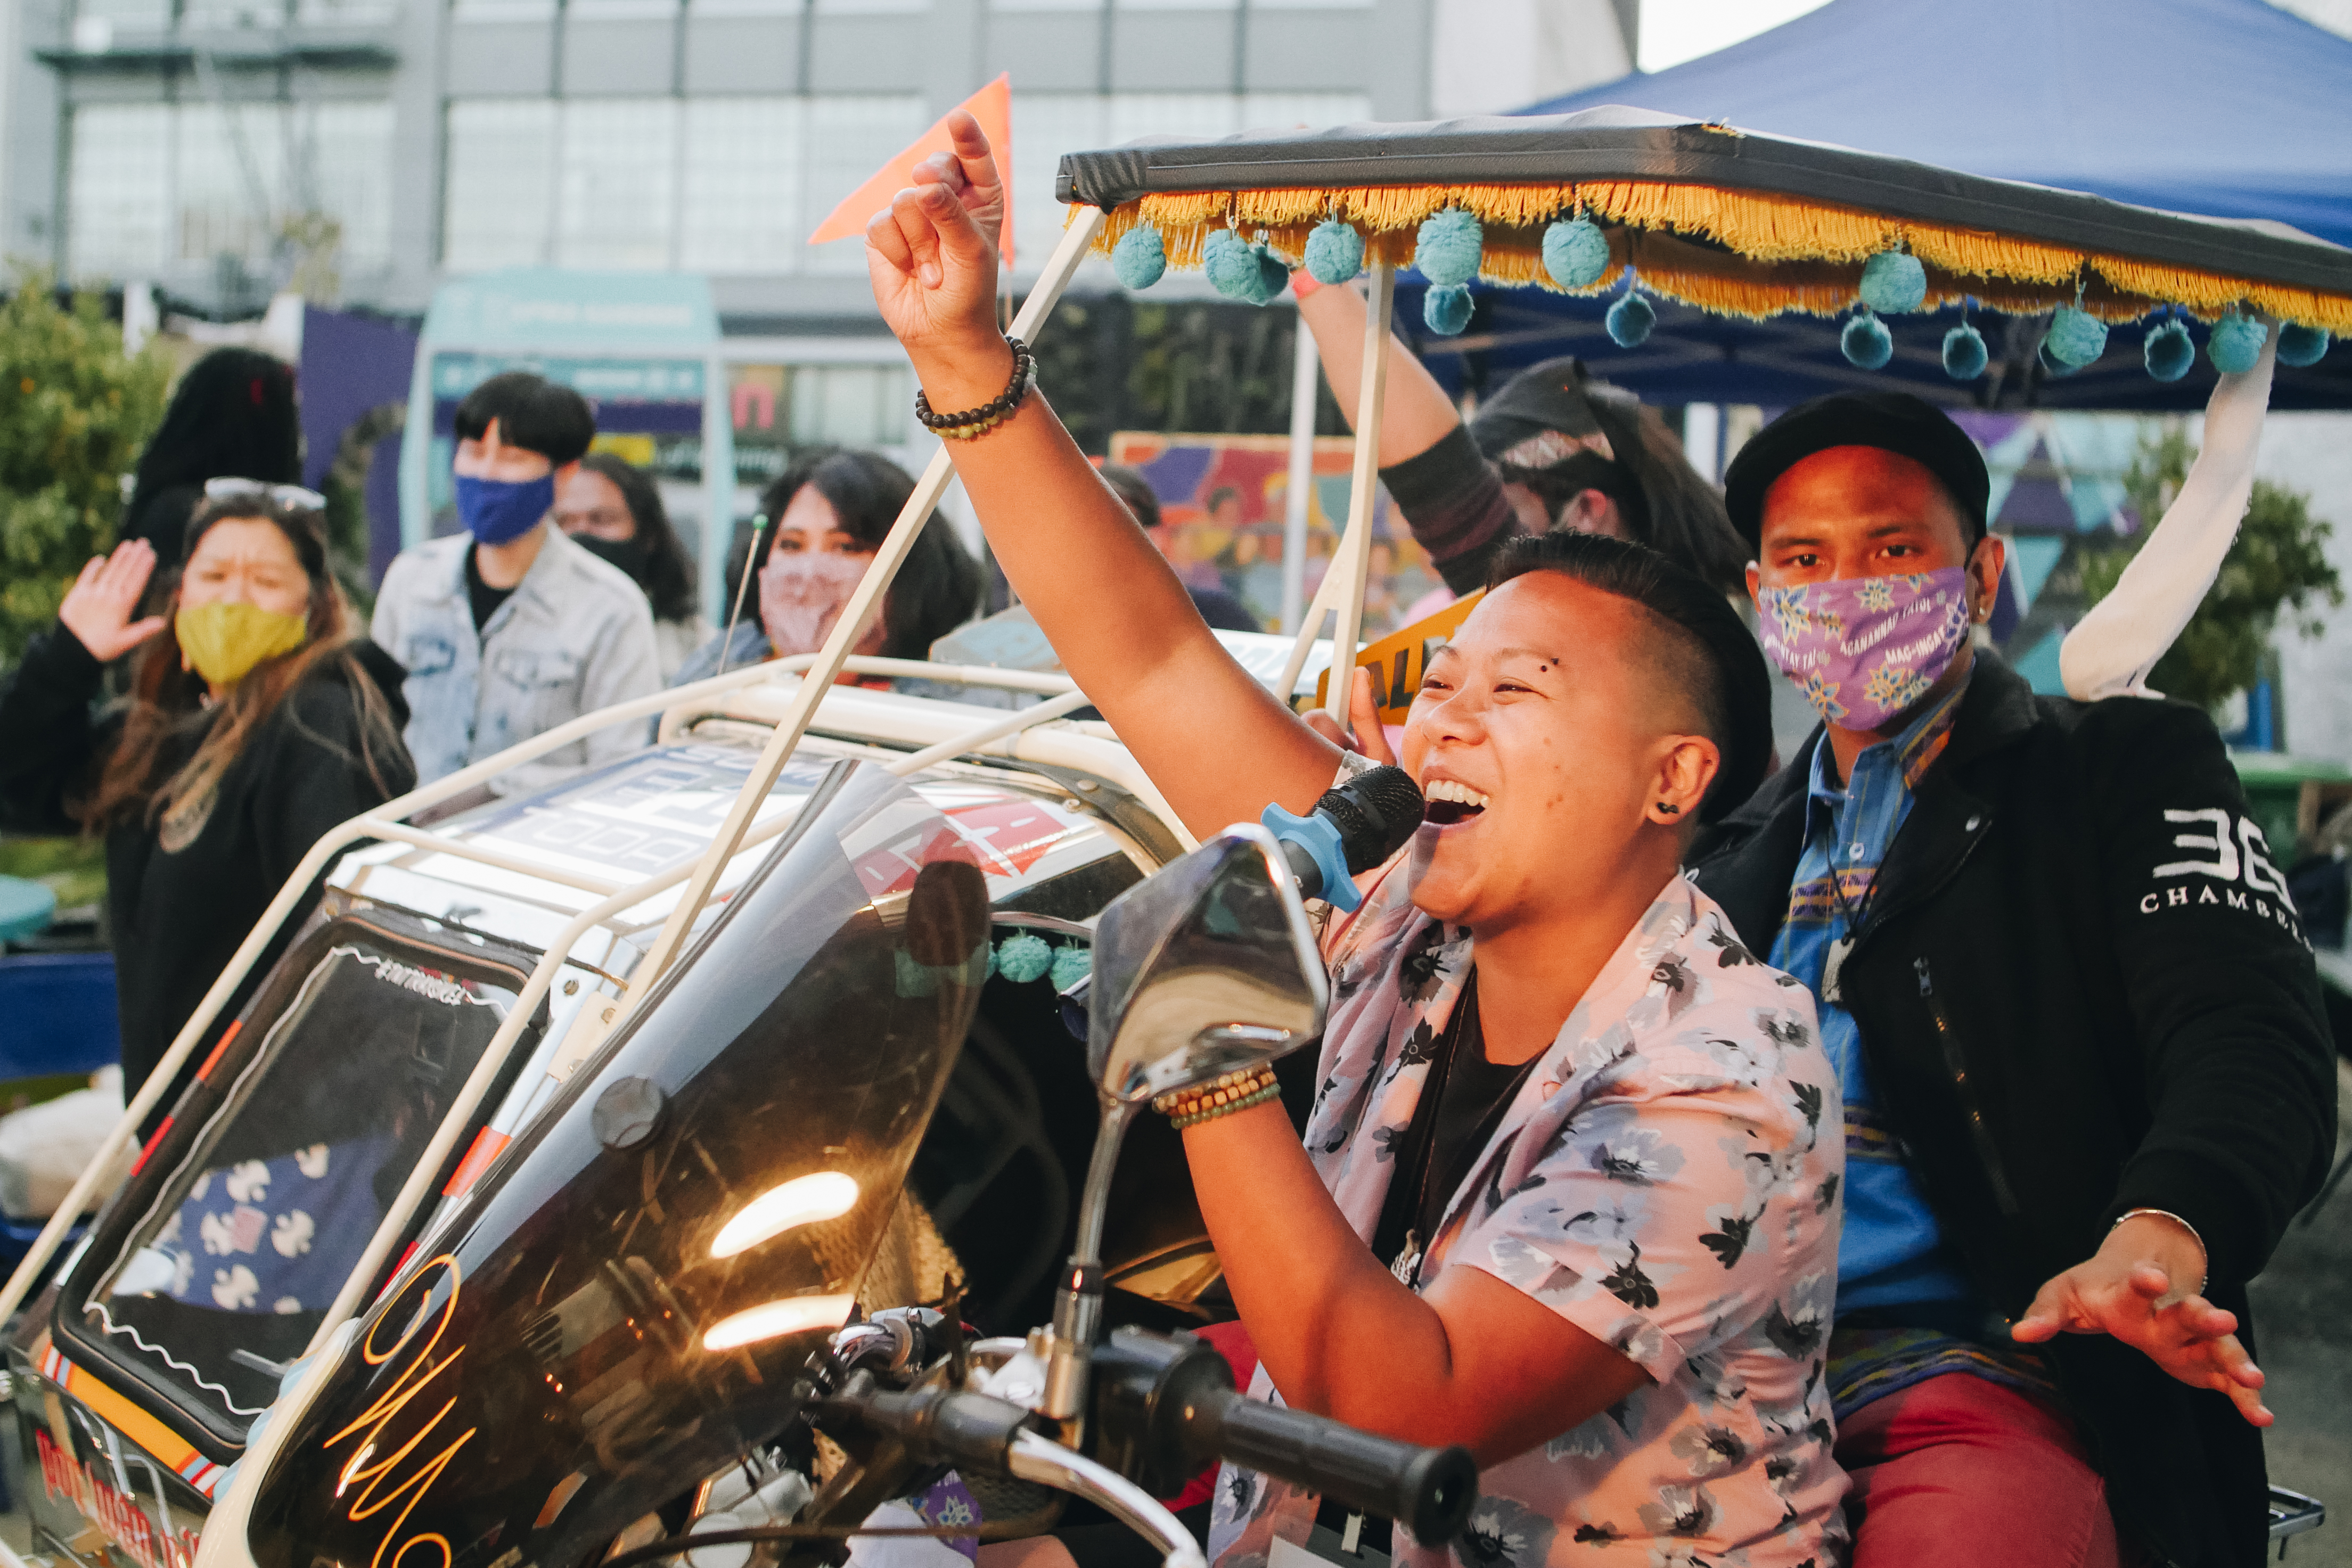 In the foreground a Philipinx person with a side shaved haircut and facial piercings holds a microphone in their left hand and raises their right in a snap. Behind them, two other people sit in a decorative tricycle, a croud cheers around them in the background.